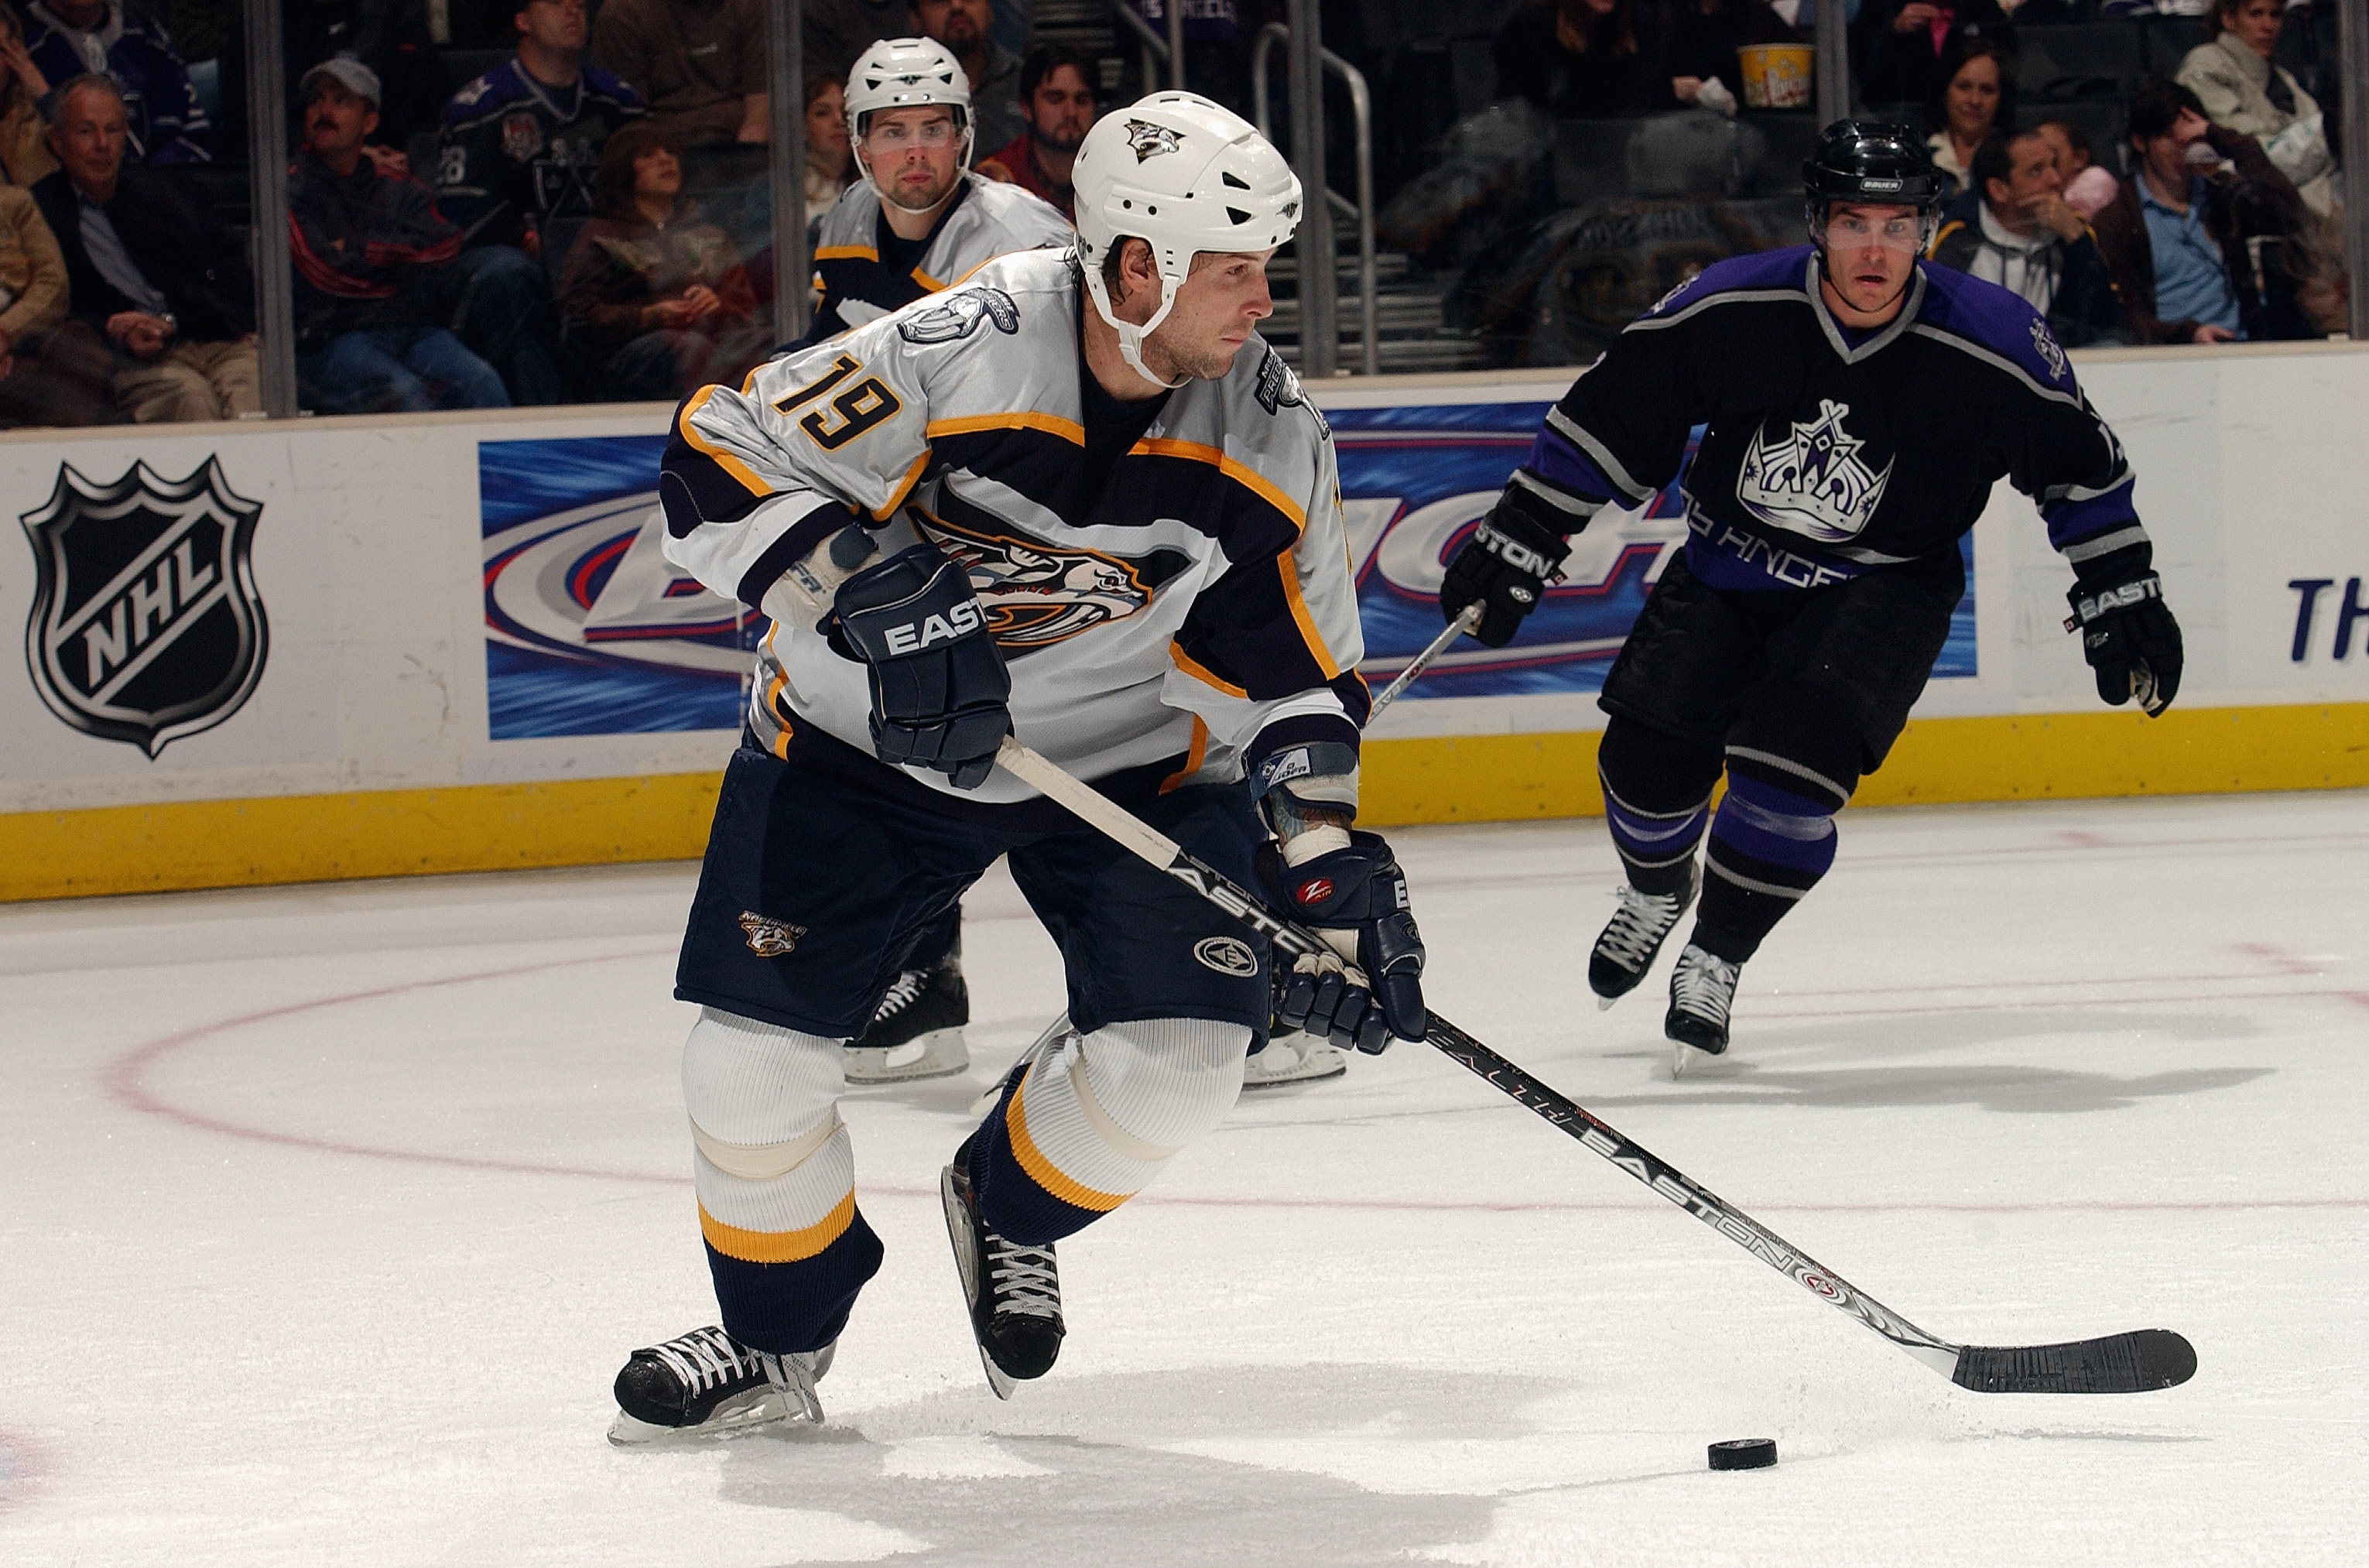 Brendan Witt #19 was the first player Nashville gave up a 1st round pick for.